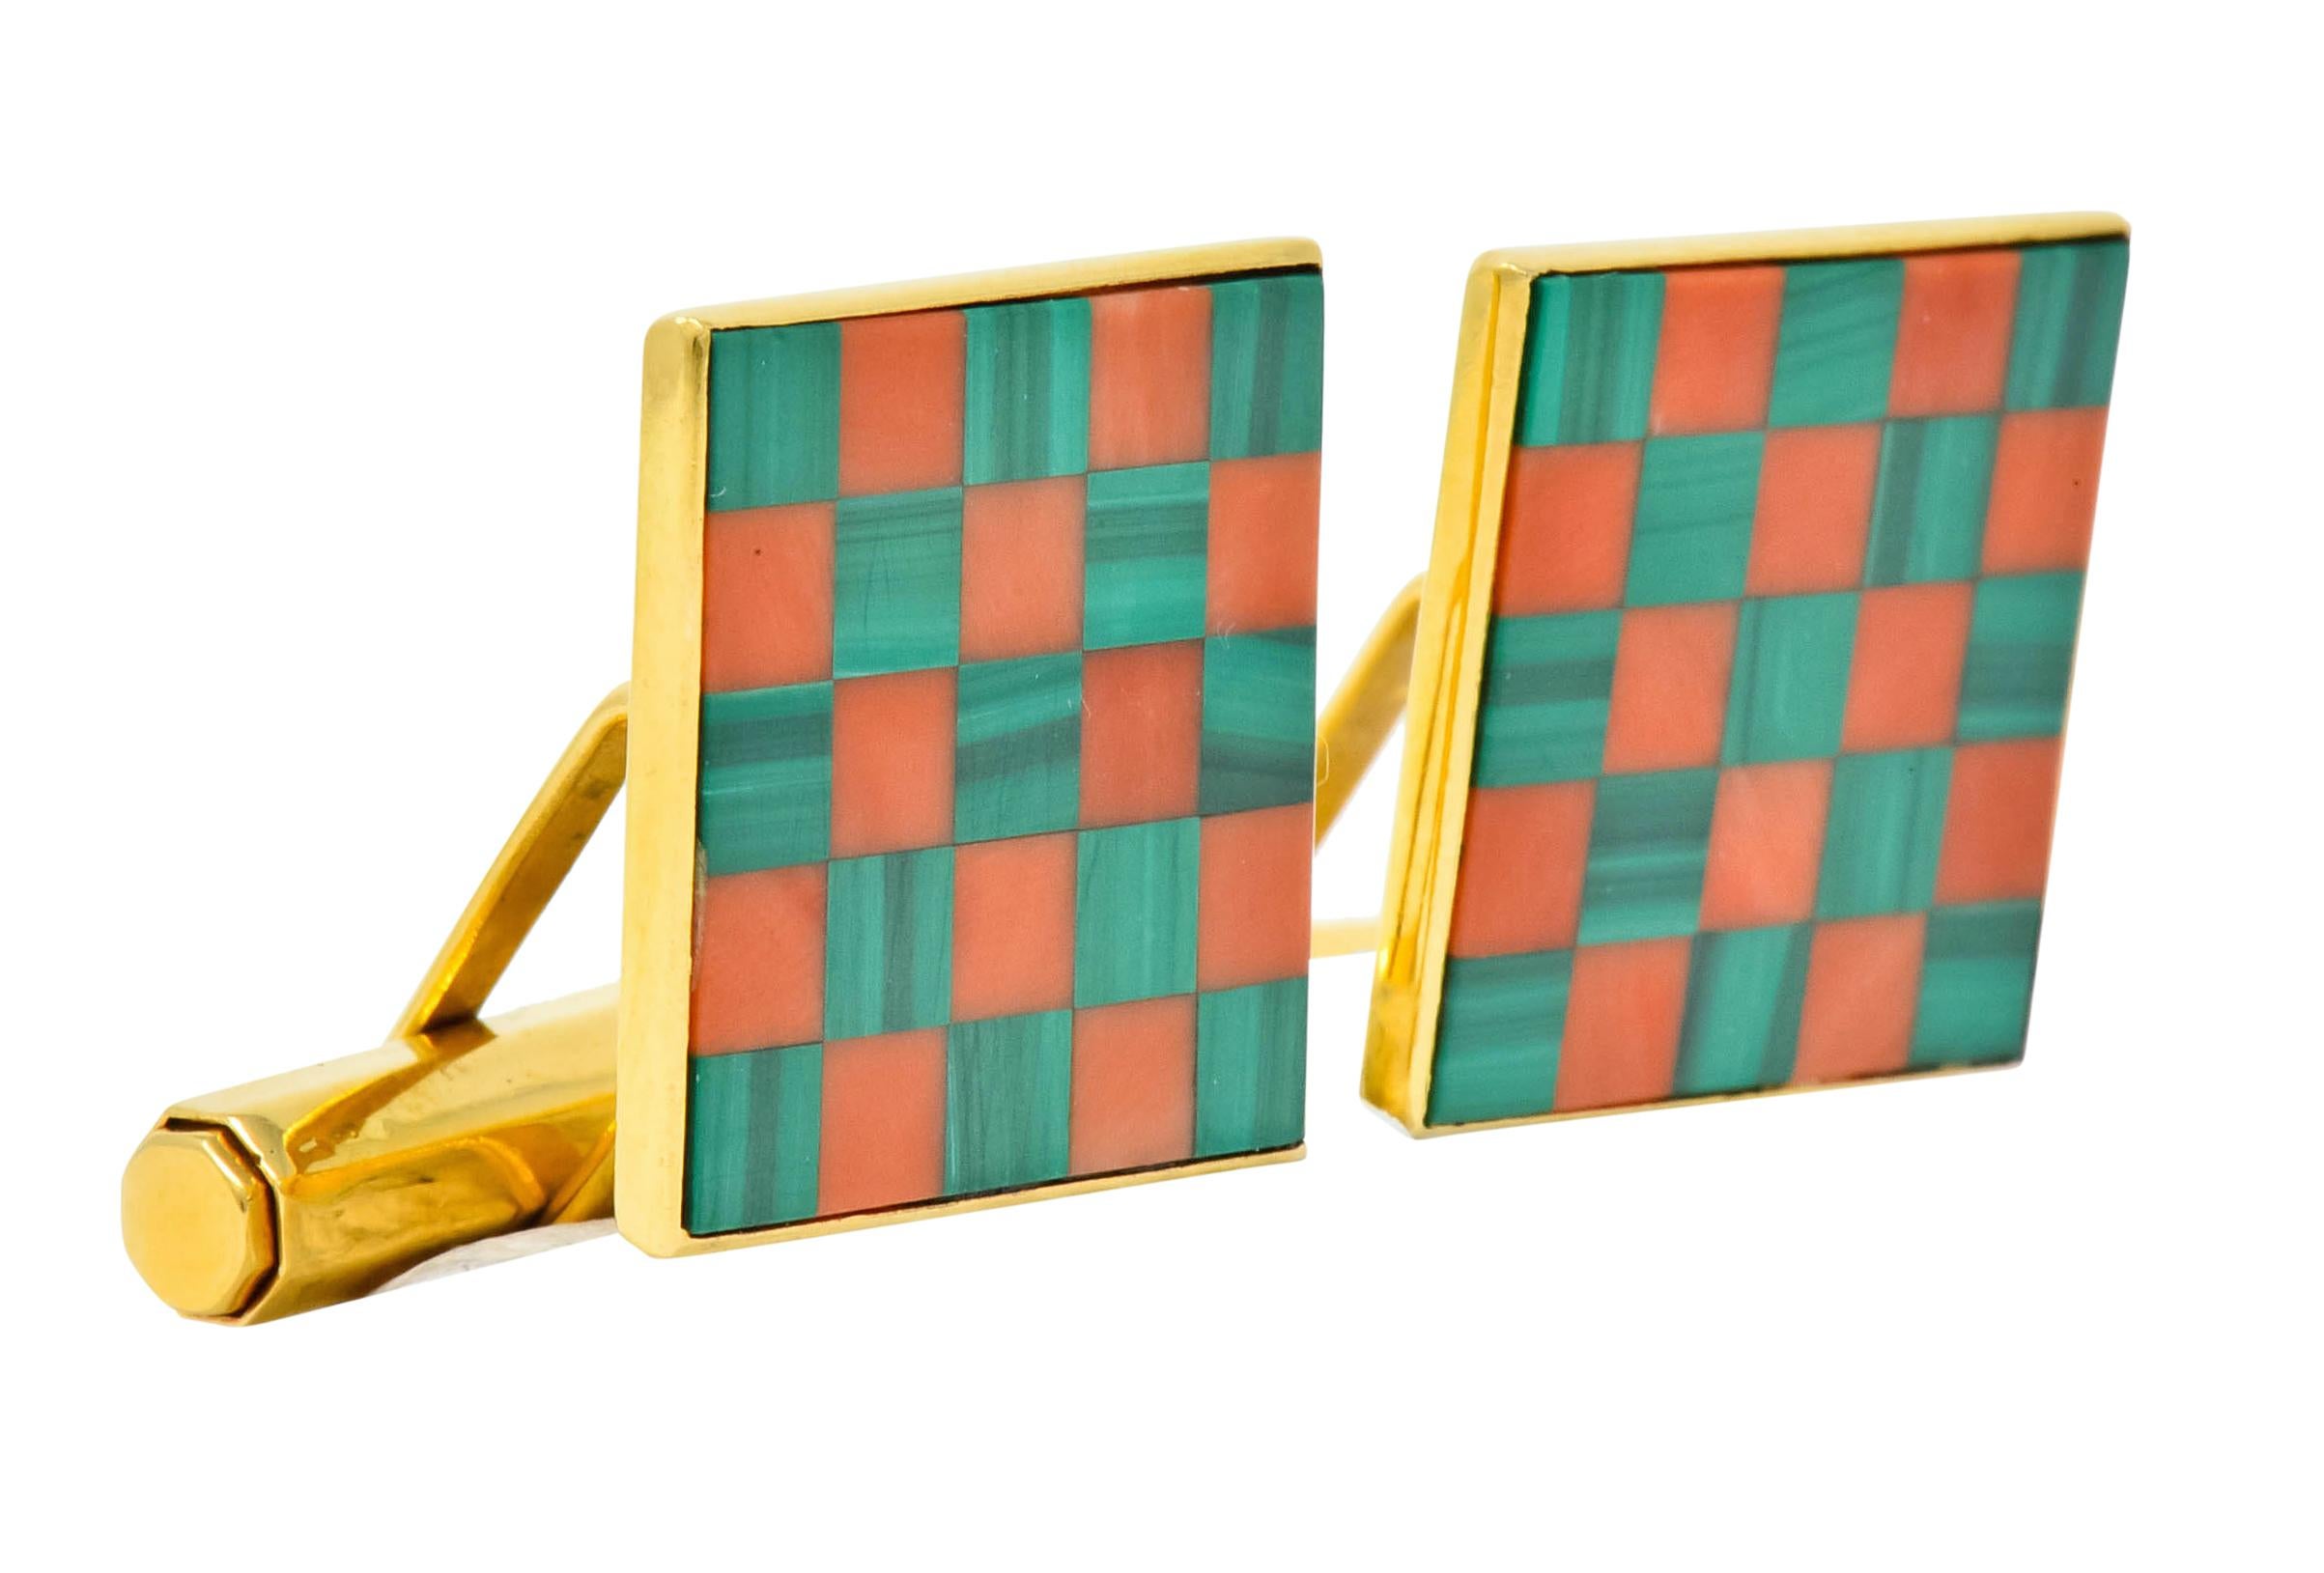 Lever style cufflinks featuring a large inlaid square in a polished gold surround

Inlay comprised of reddish-orange coral and banded green malachite, alternating seamlessly in a checkerboard motif

With maker's mark for Asprey & Co. and British